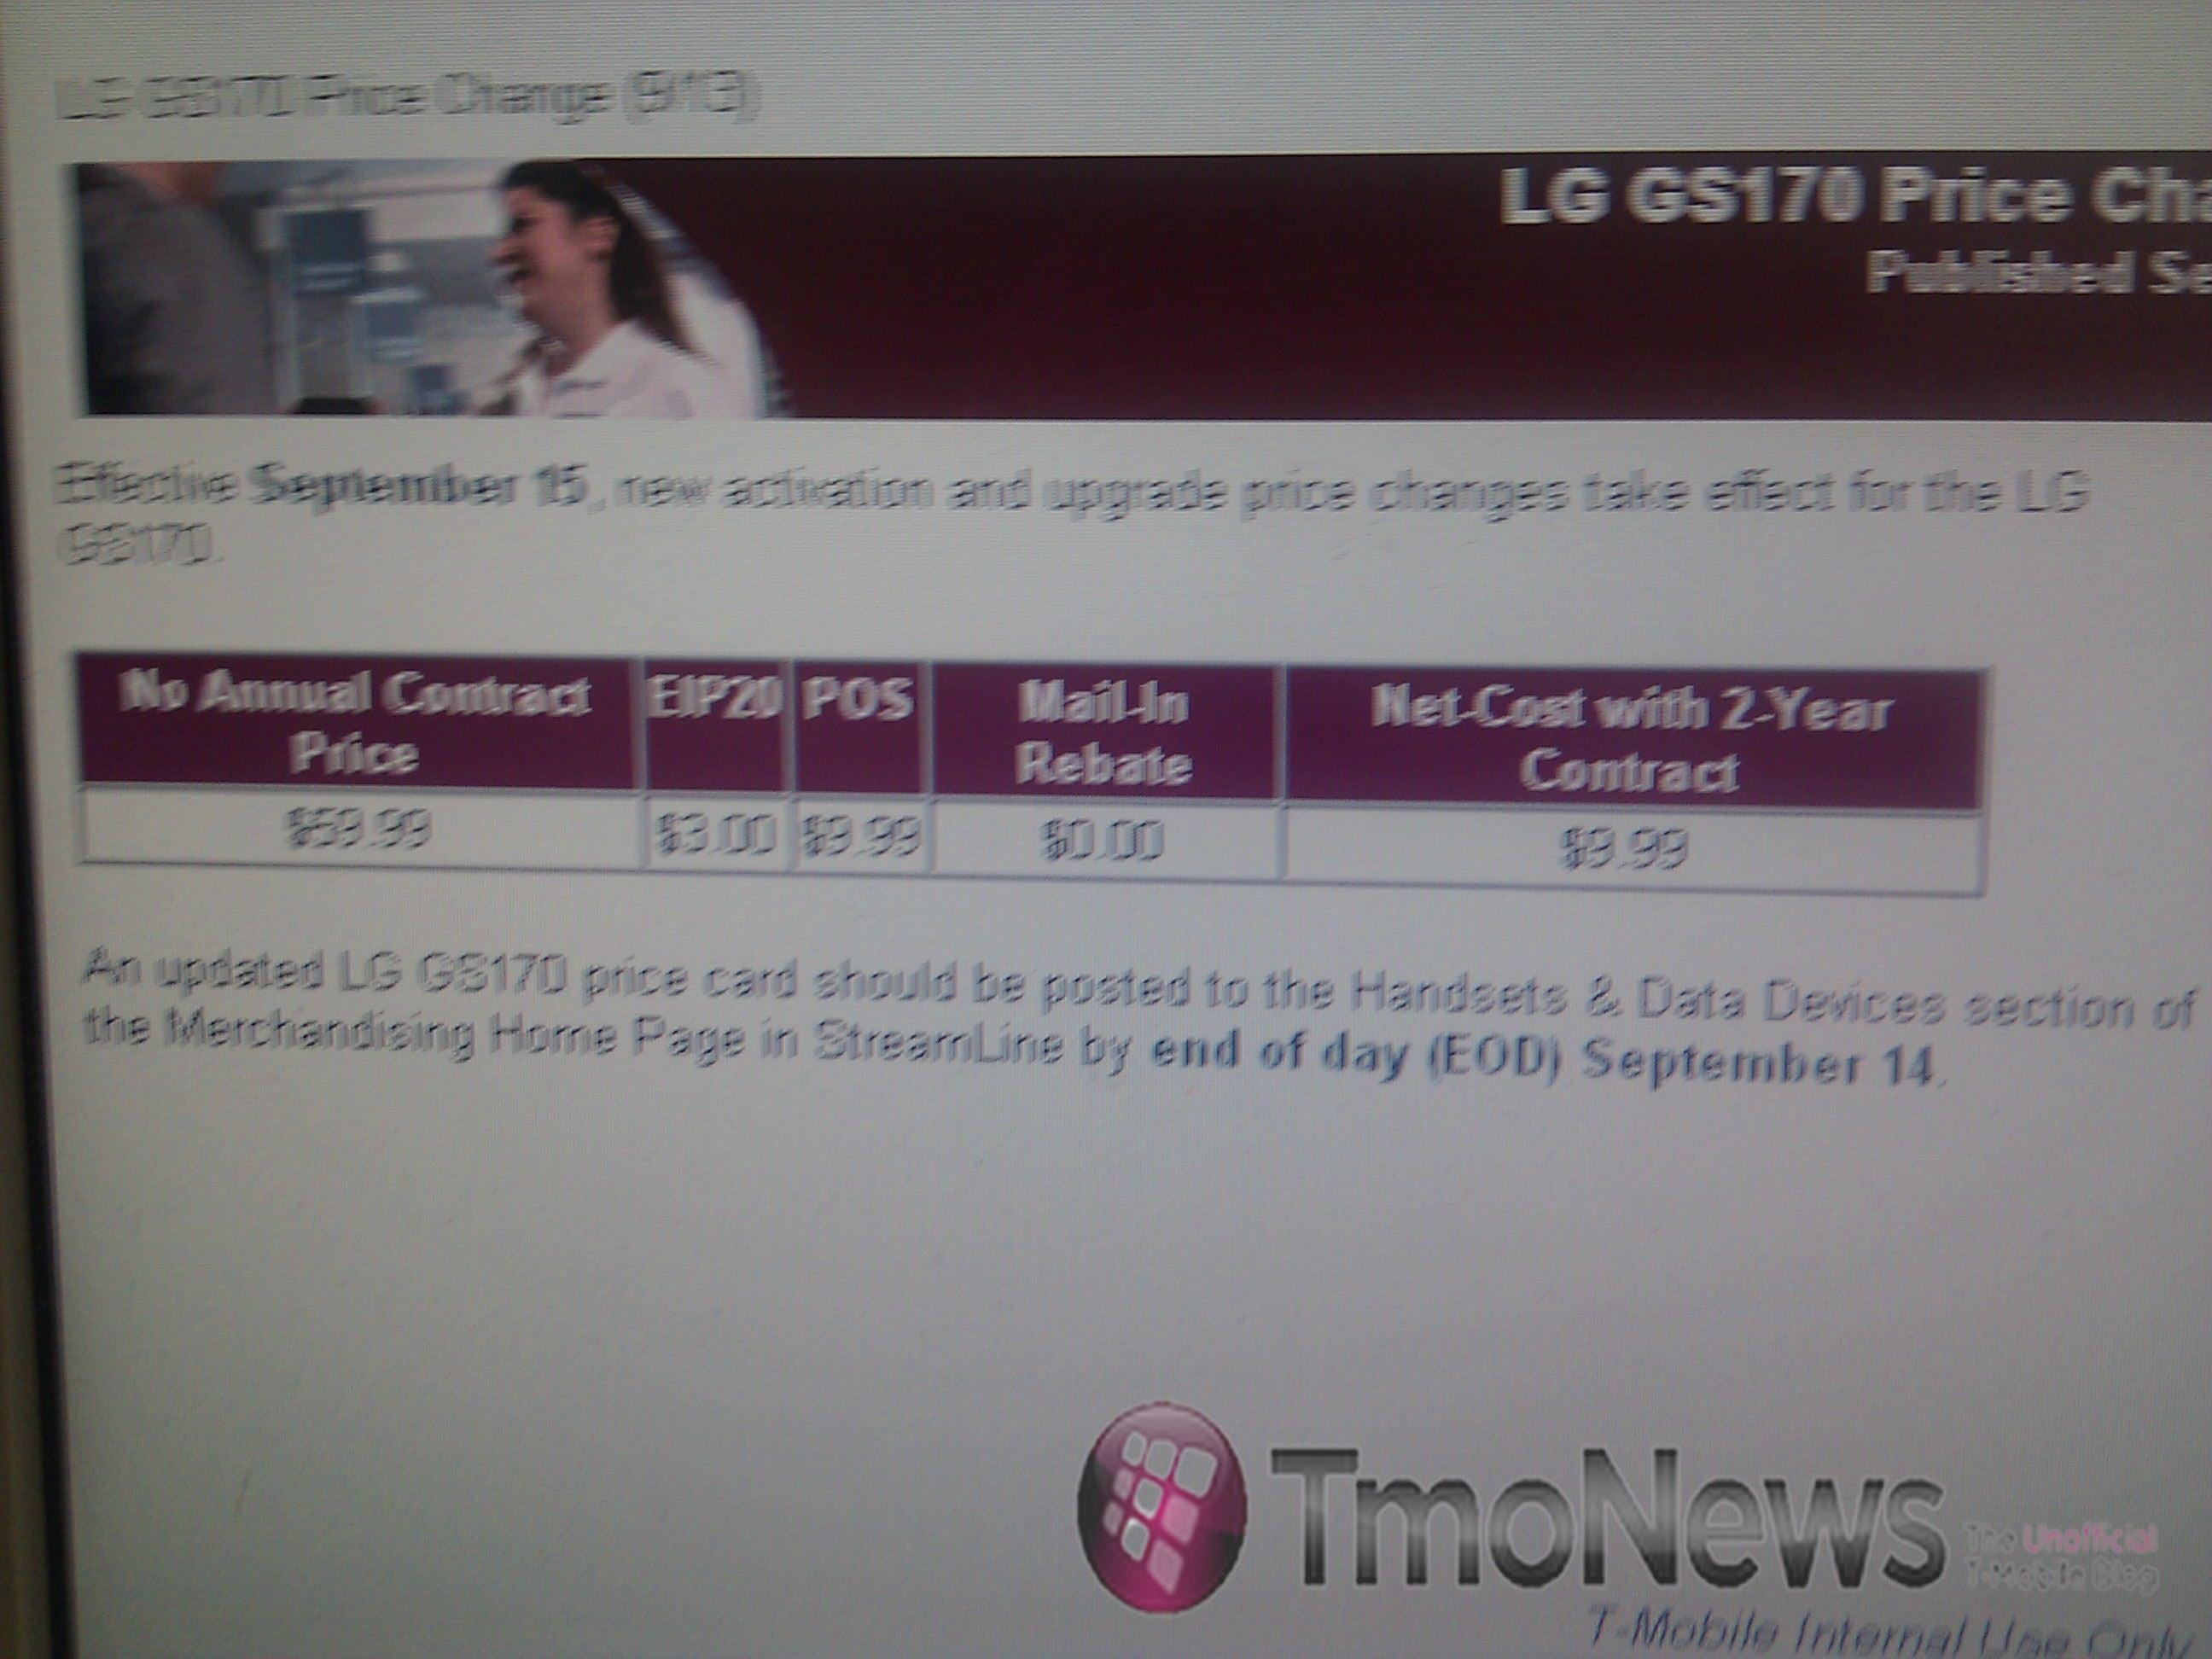 LG GS170 for T-Mobile is getting an unusual price increase?